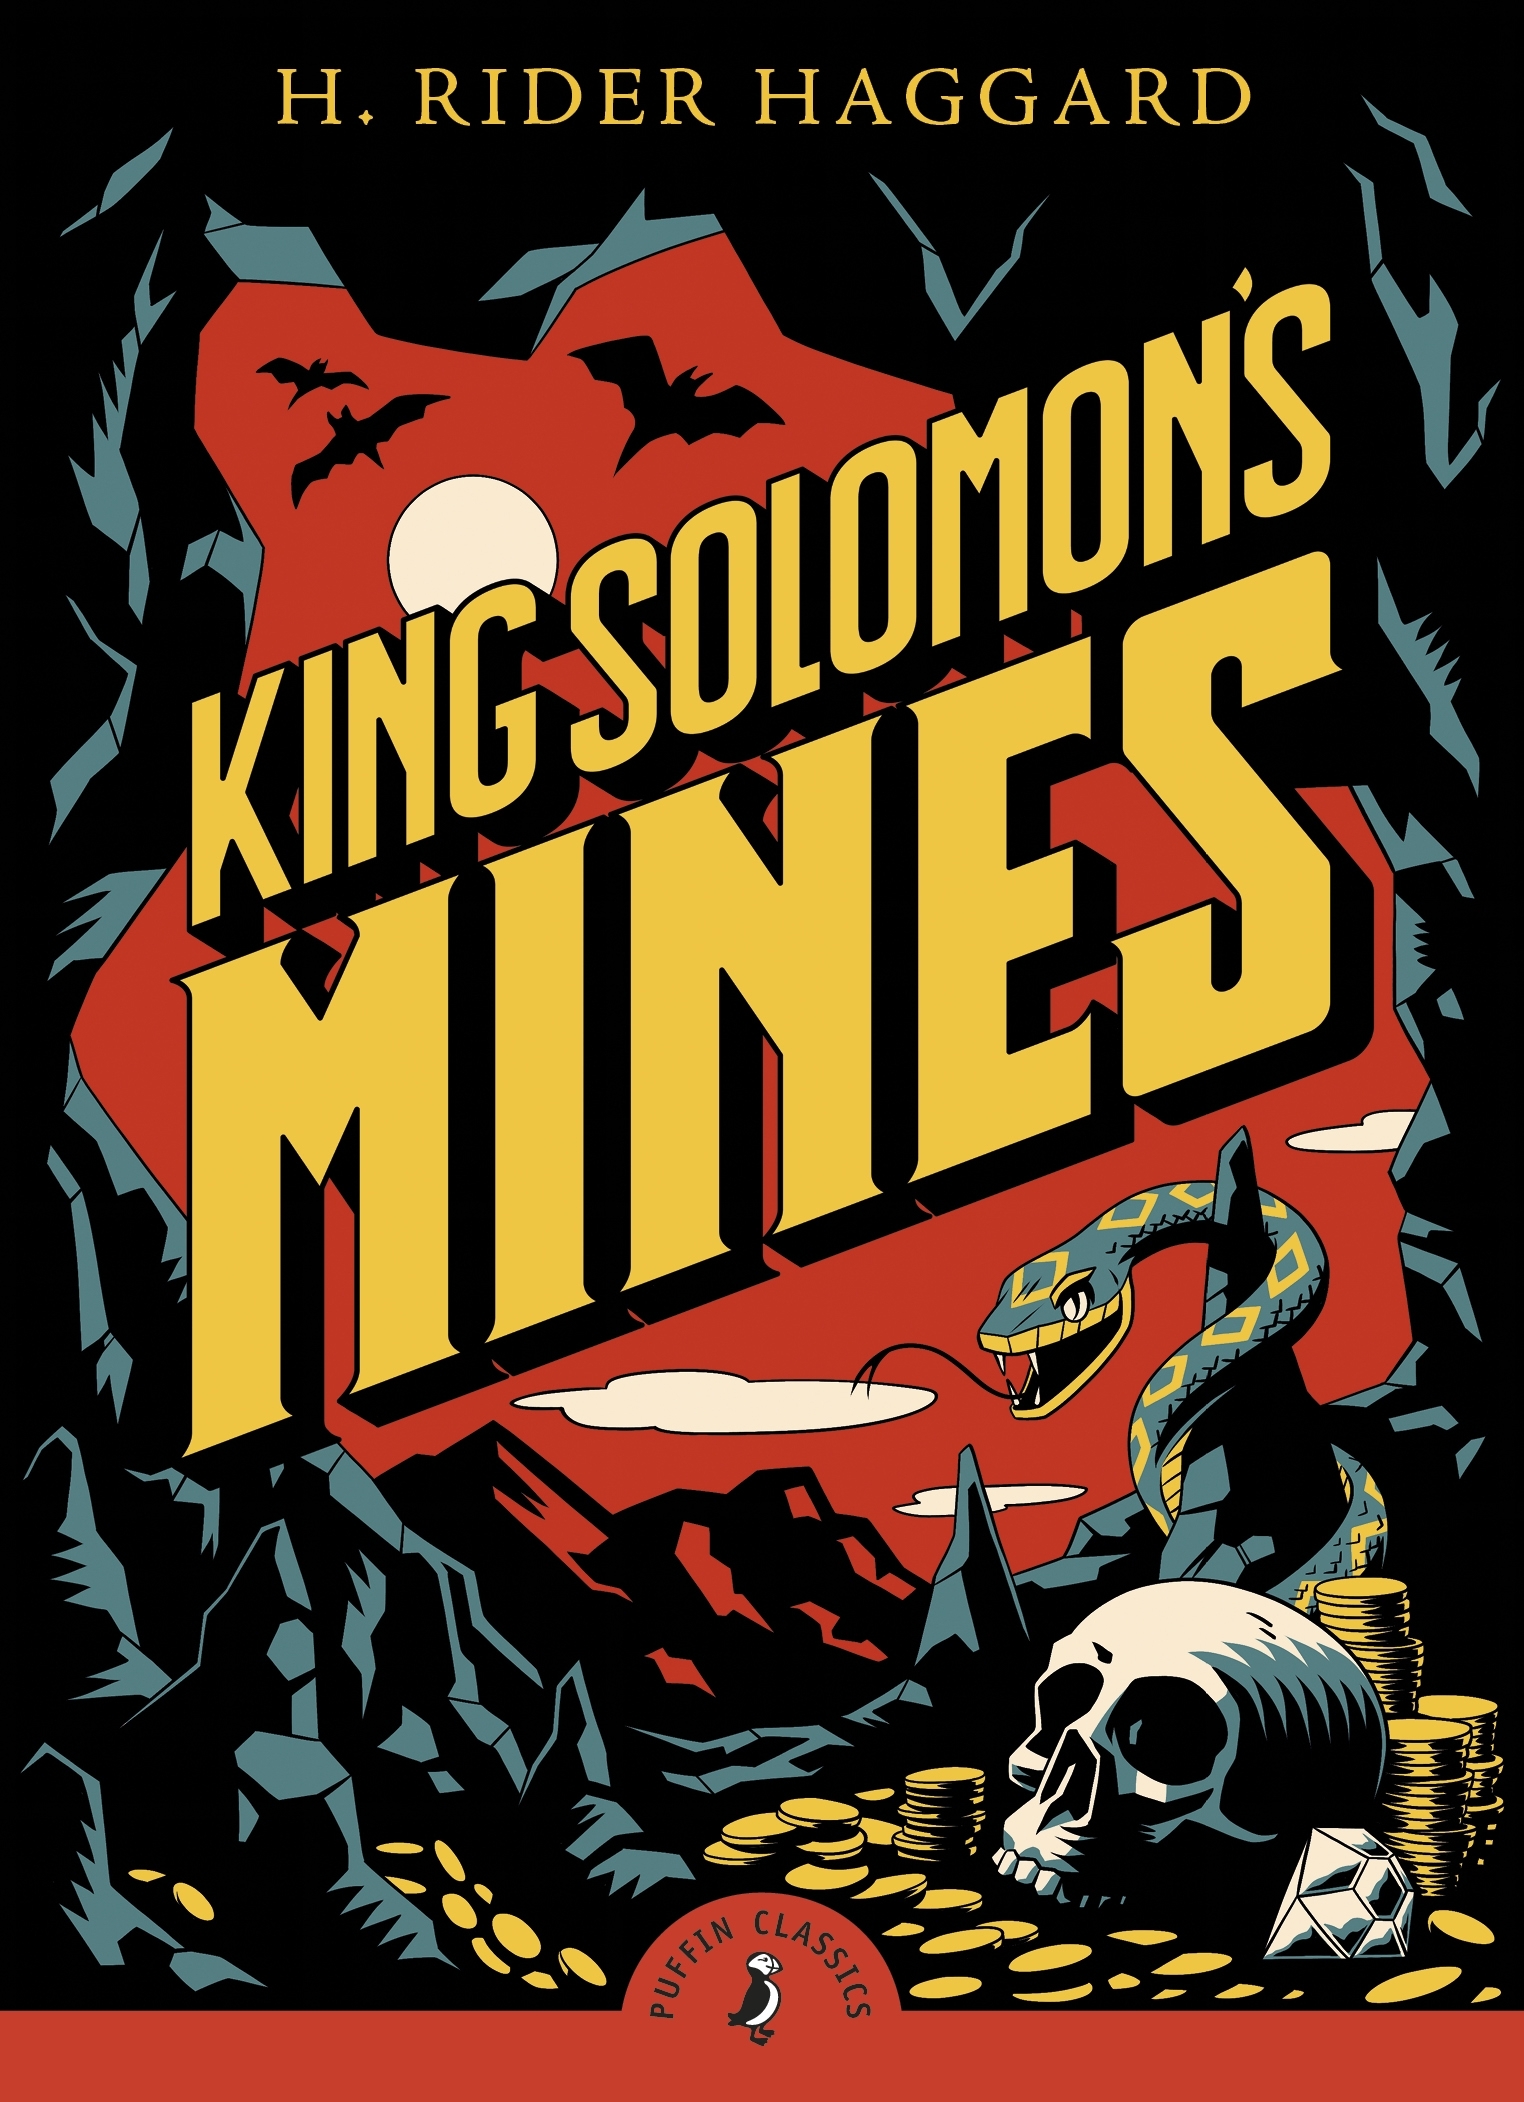 book review of king solomon mines